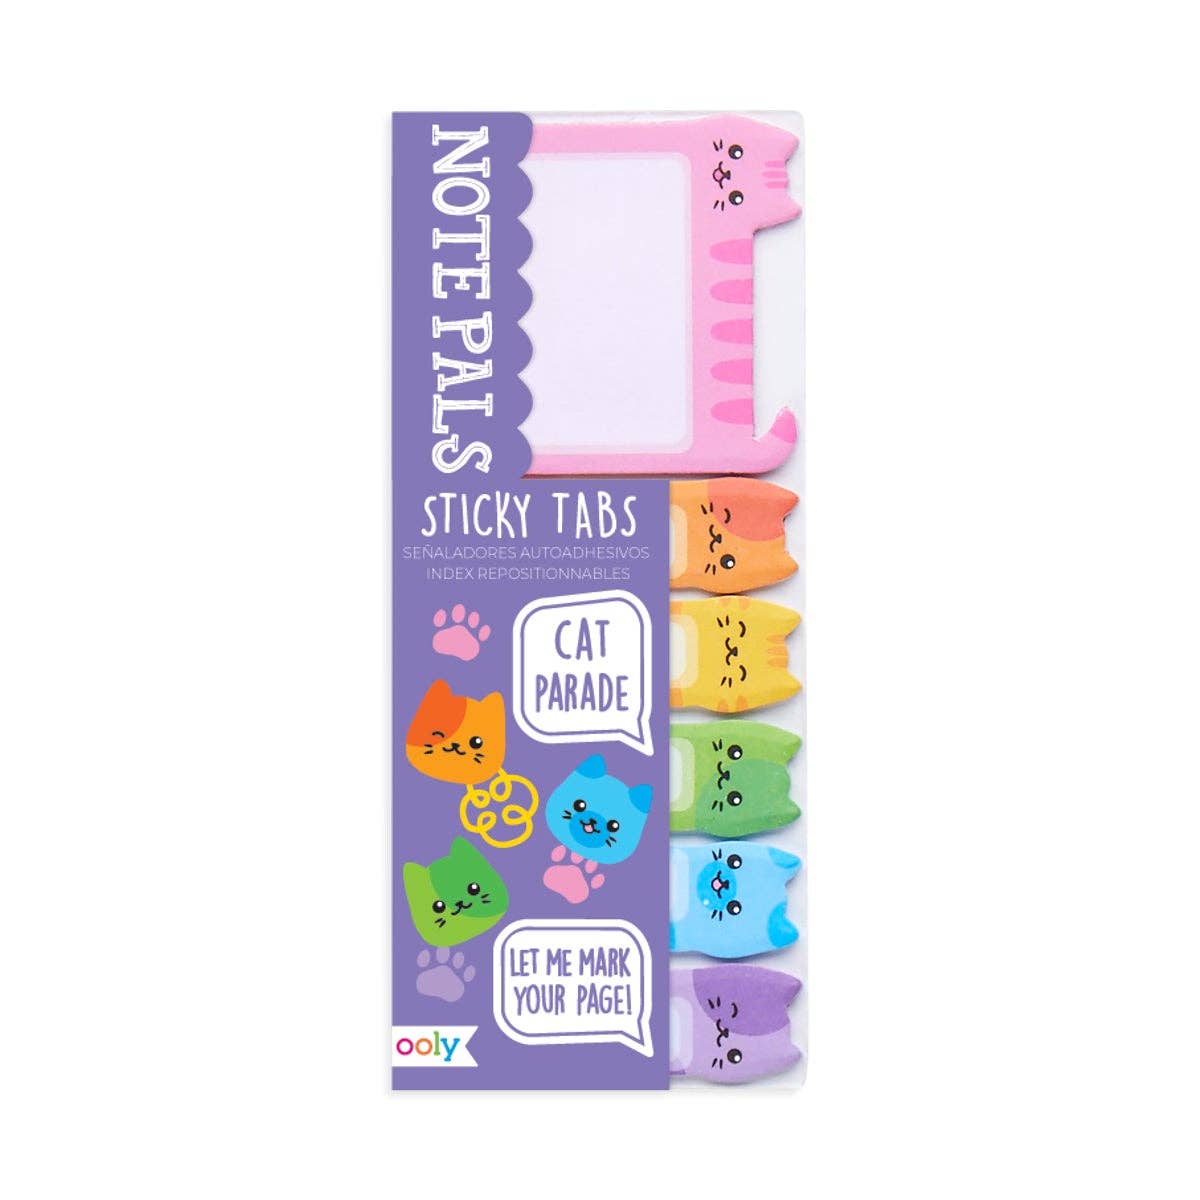 OOLY - Note Pals Sticky Tabs - Cat Parade (1 Pack)